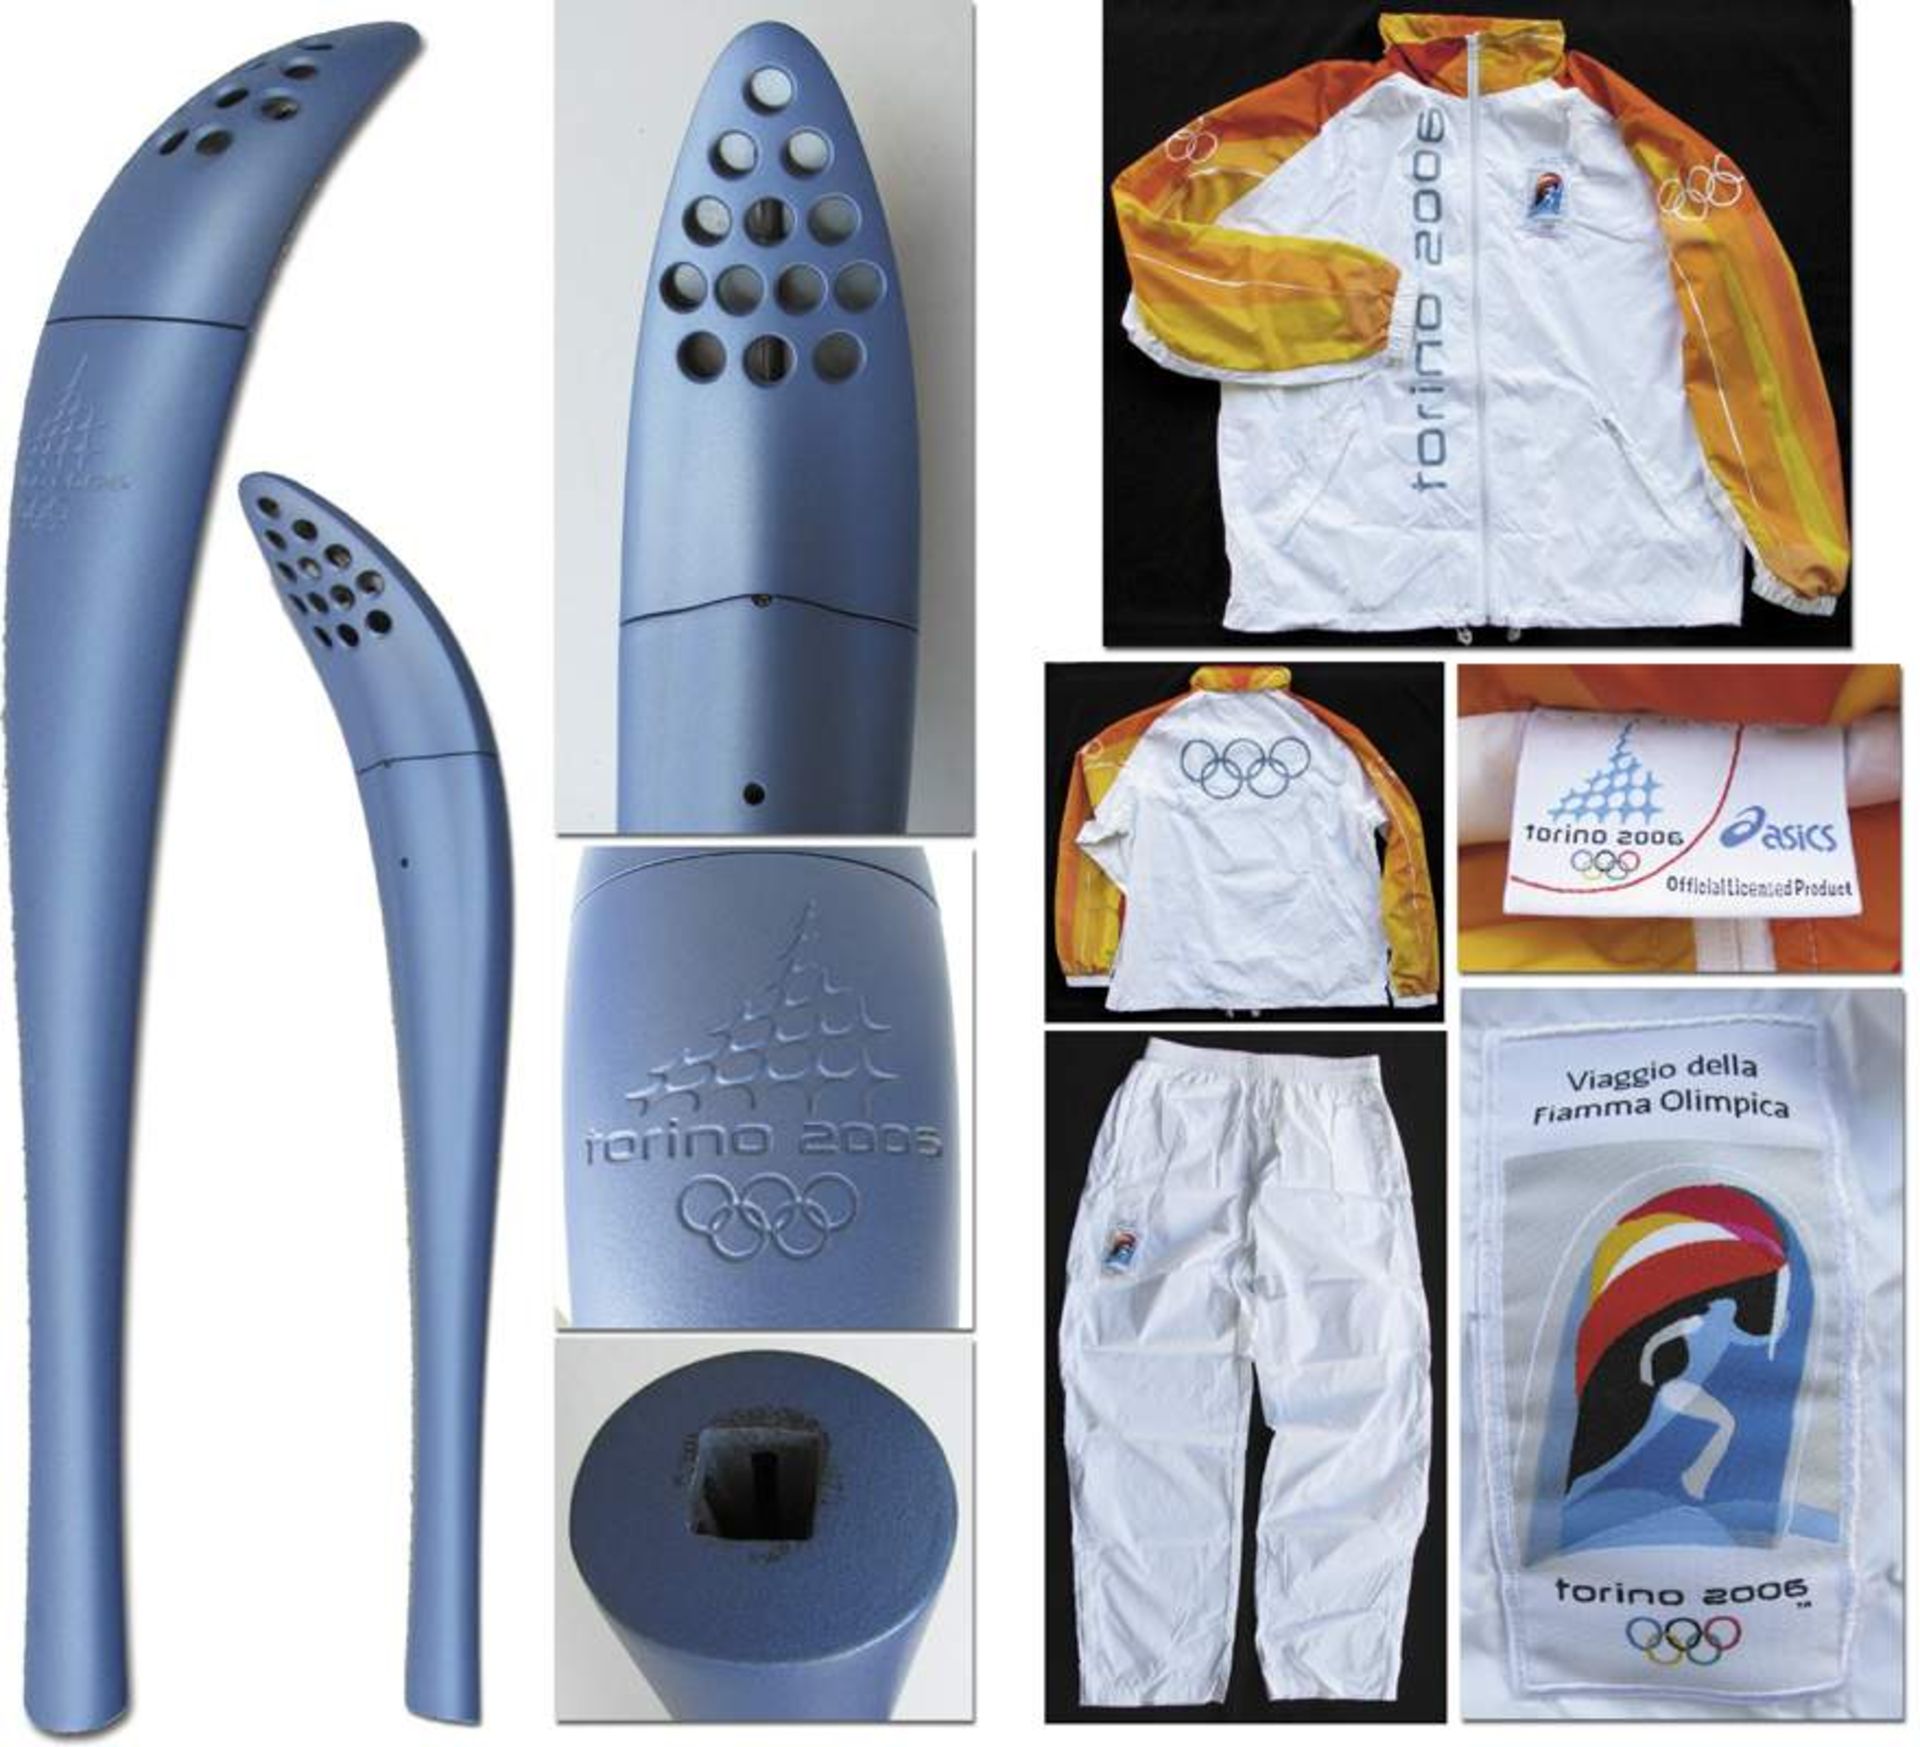 Olmypic Games 2006. Official Torch Torino +Suite - Official torch of the Olympic Games 2006 in